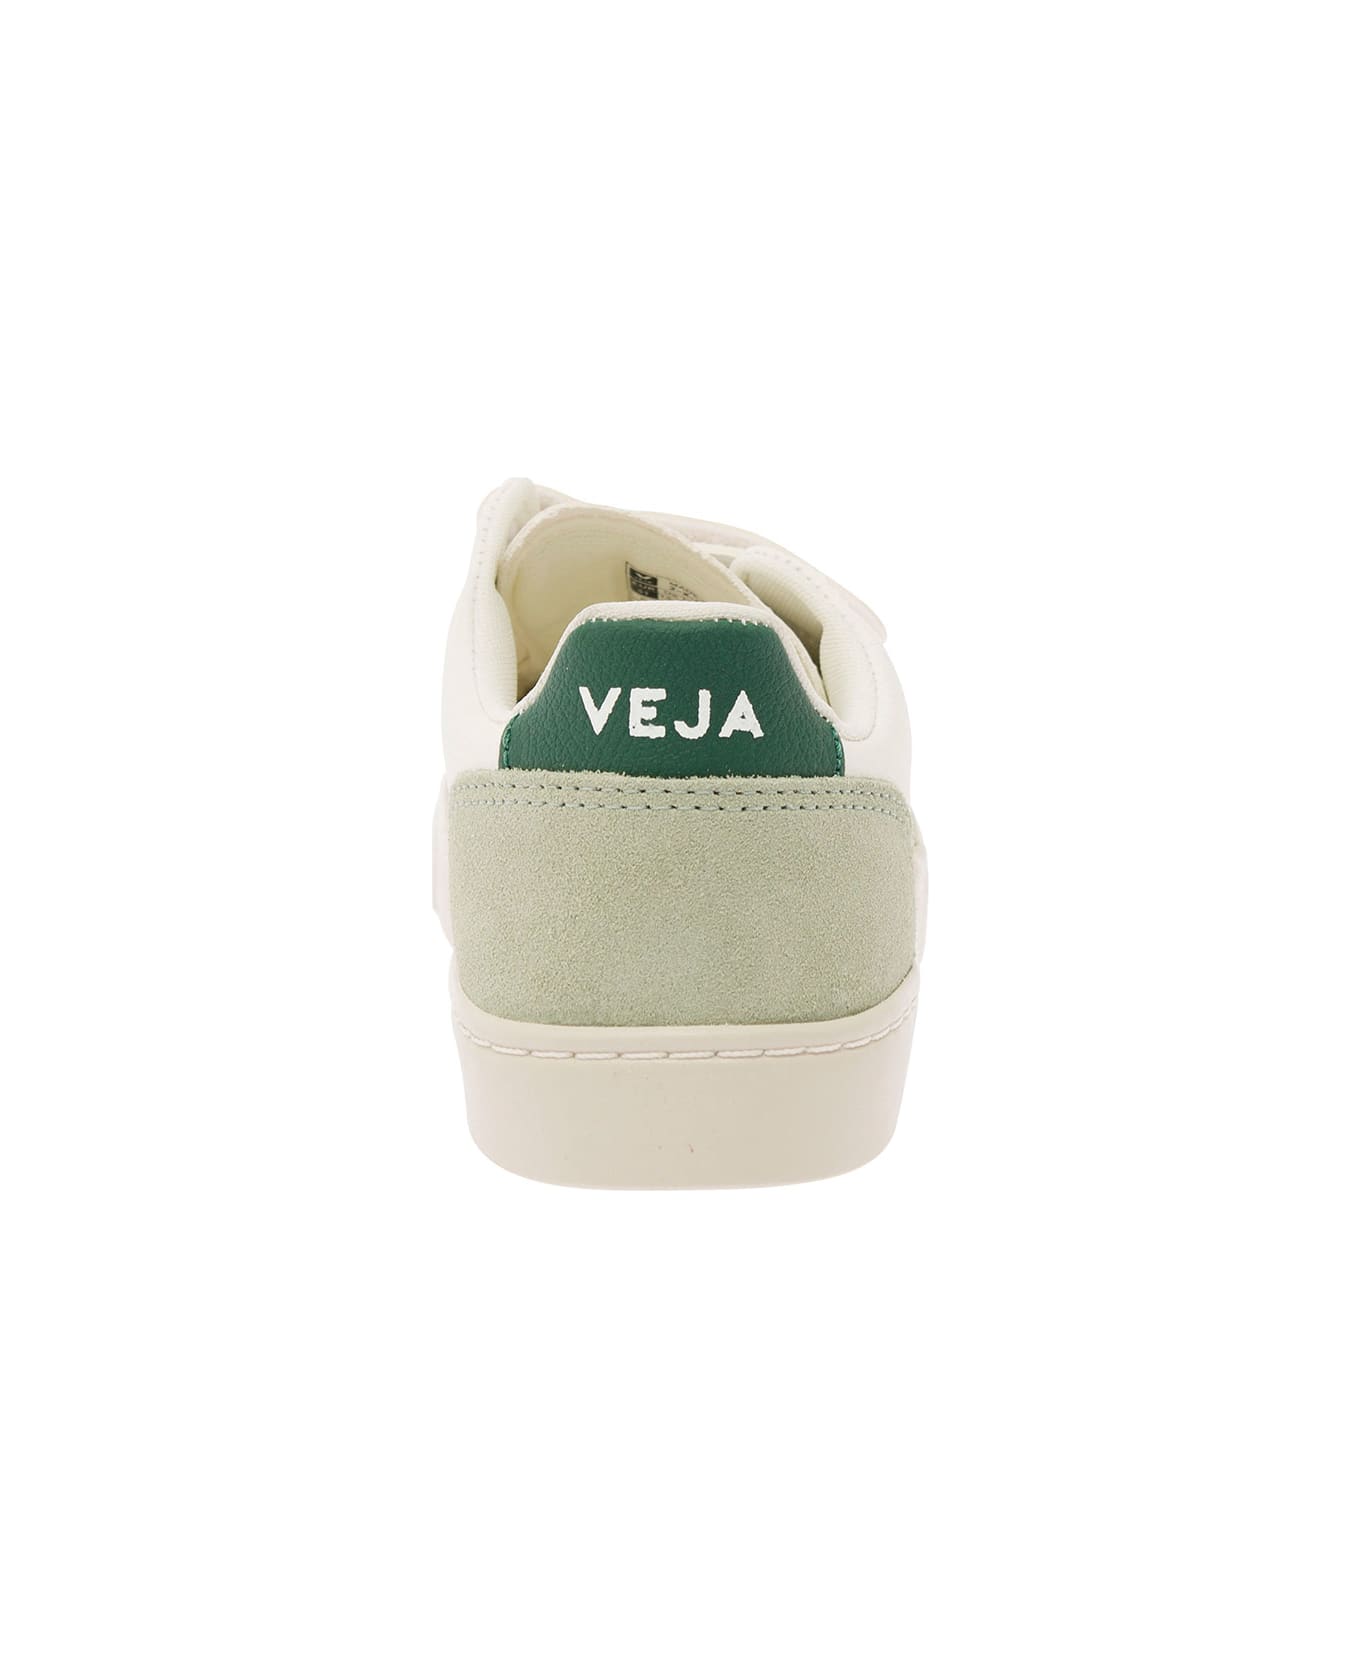 Veja White And Green Low Top Sneakers With Logo Patch In Leather And Suede Boy - Multicolor